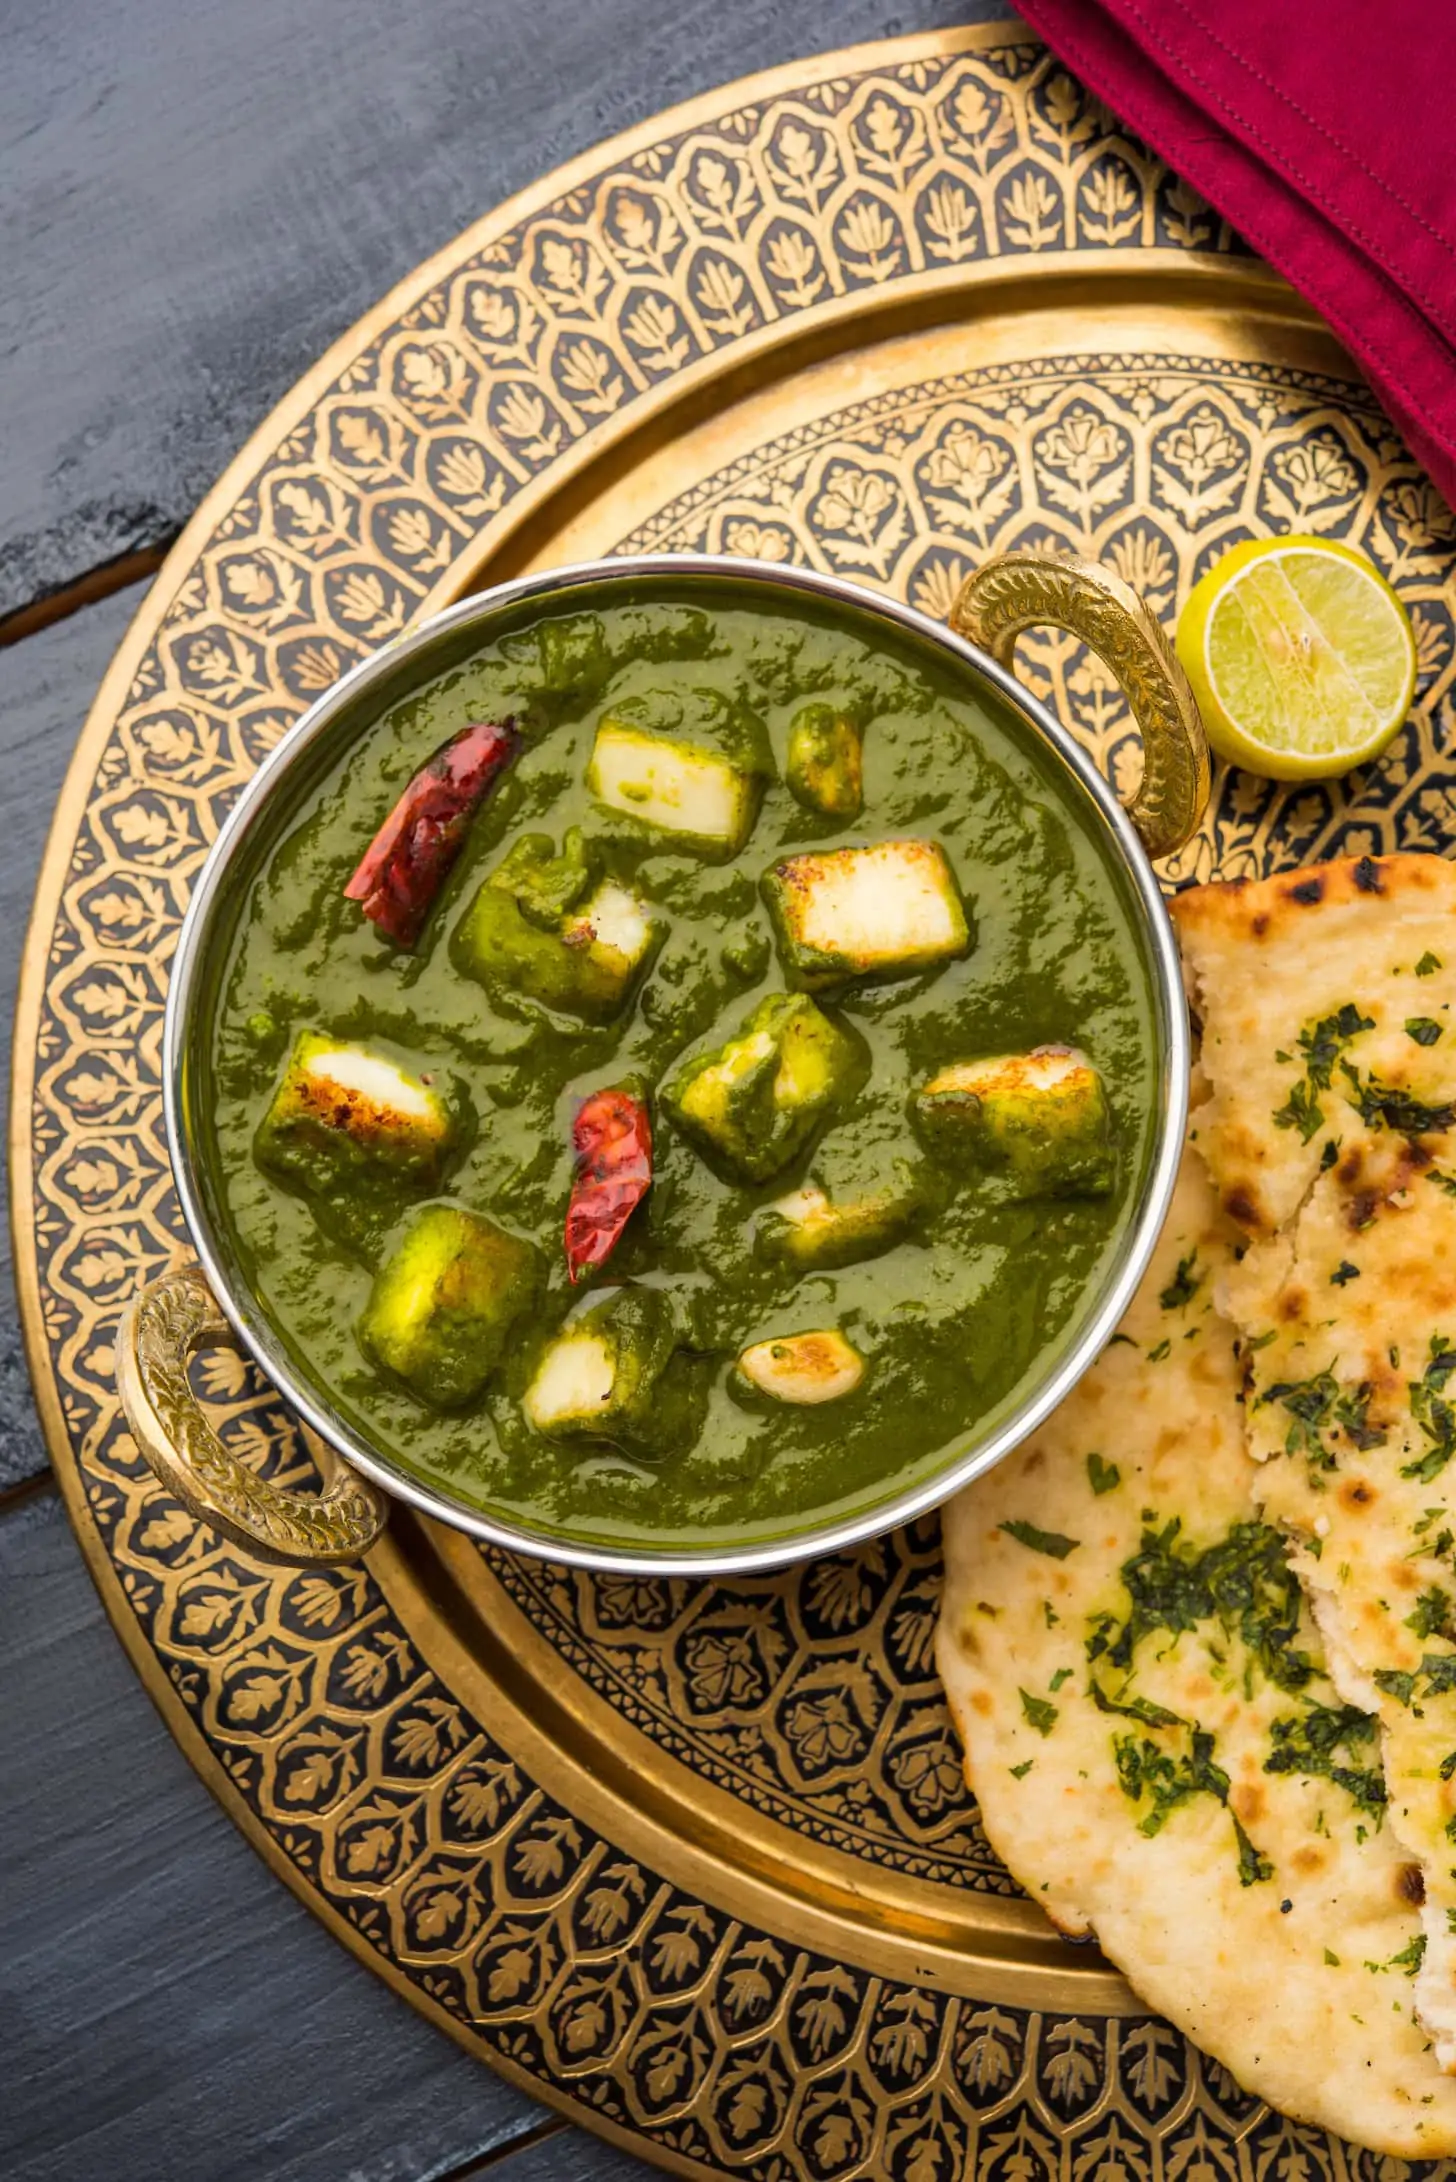 a bowl of green sauce with pieces of paneer on a patterned gold tray with a naan.